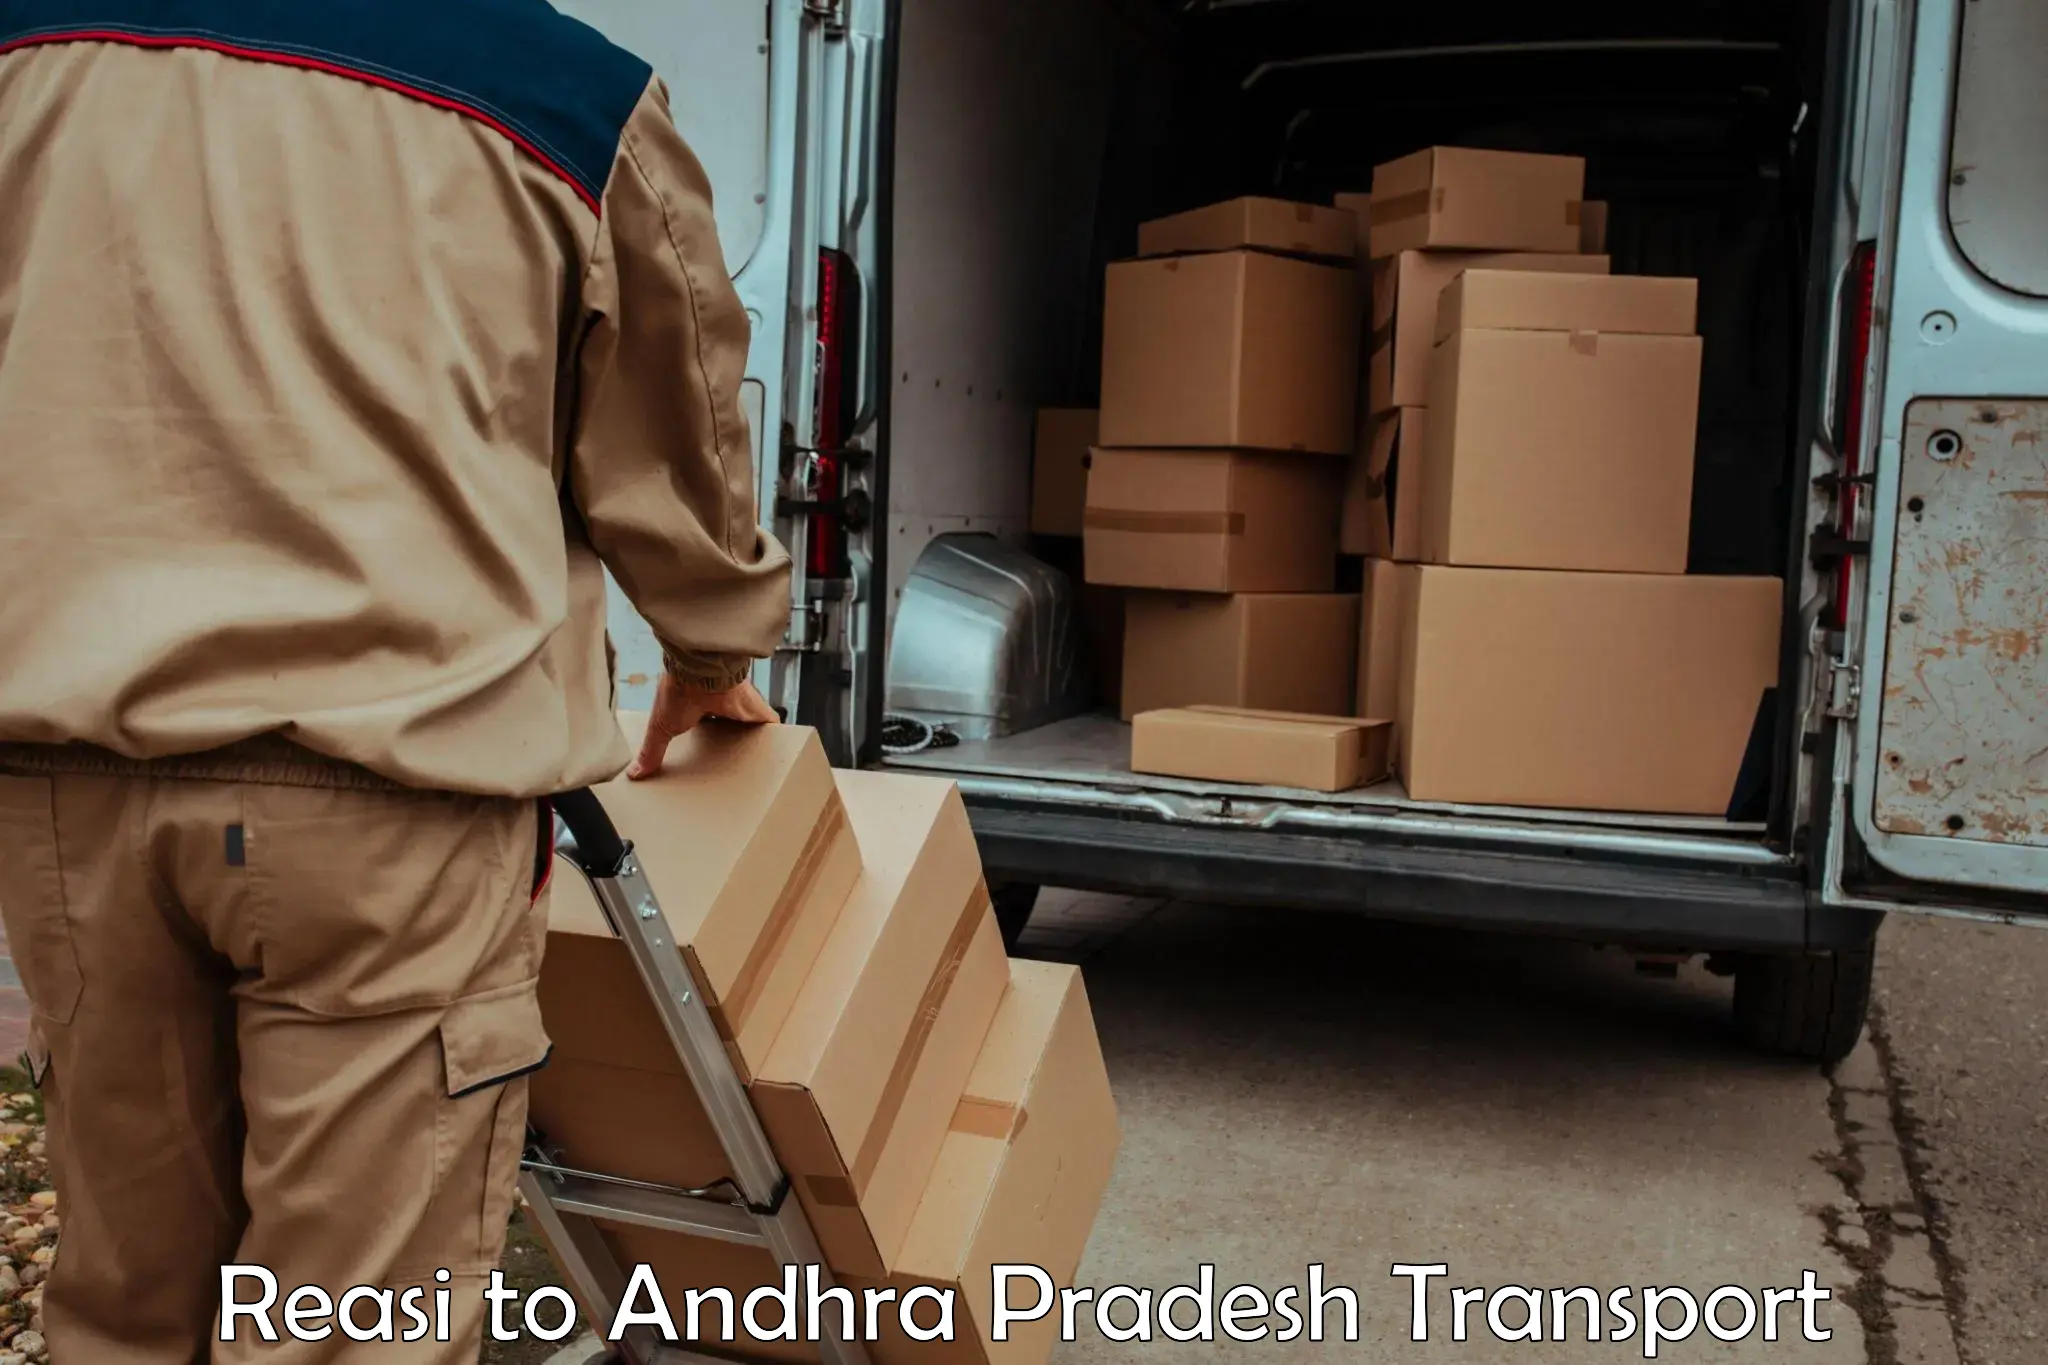 Luggage transport services Reasi to Gampalagudem